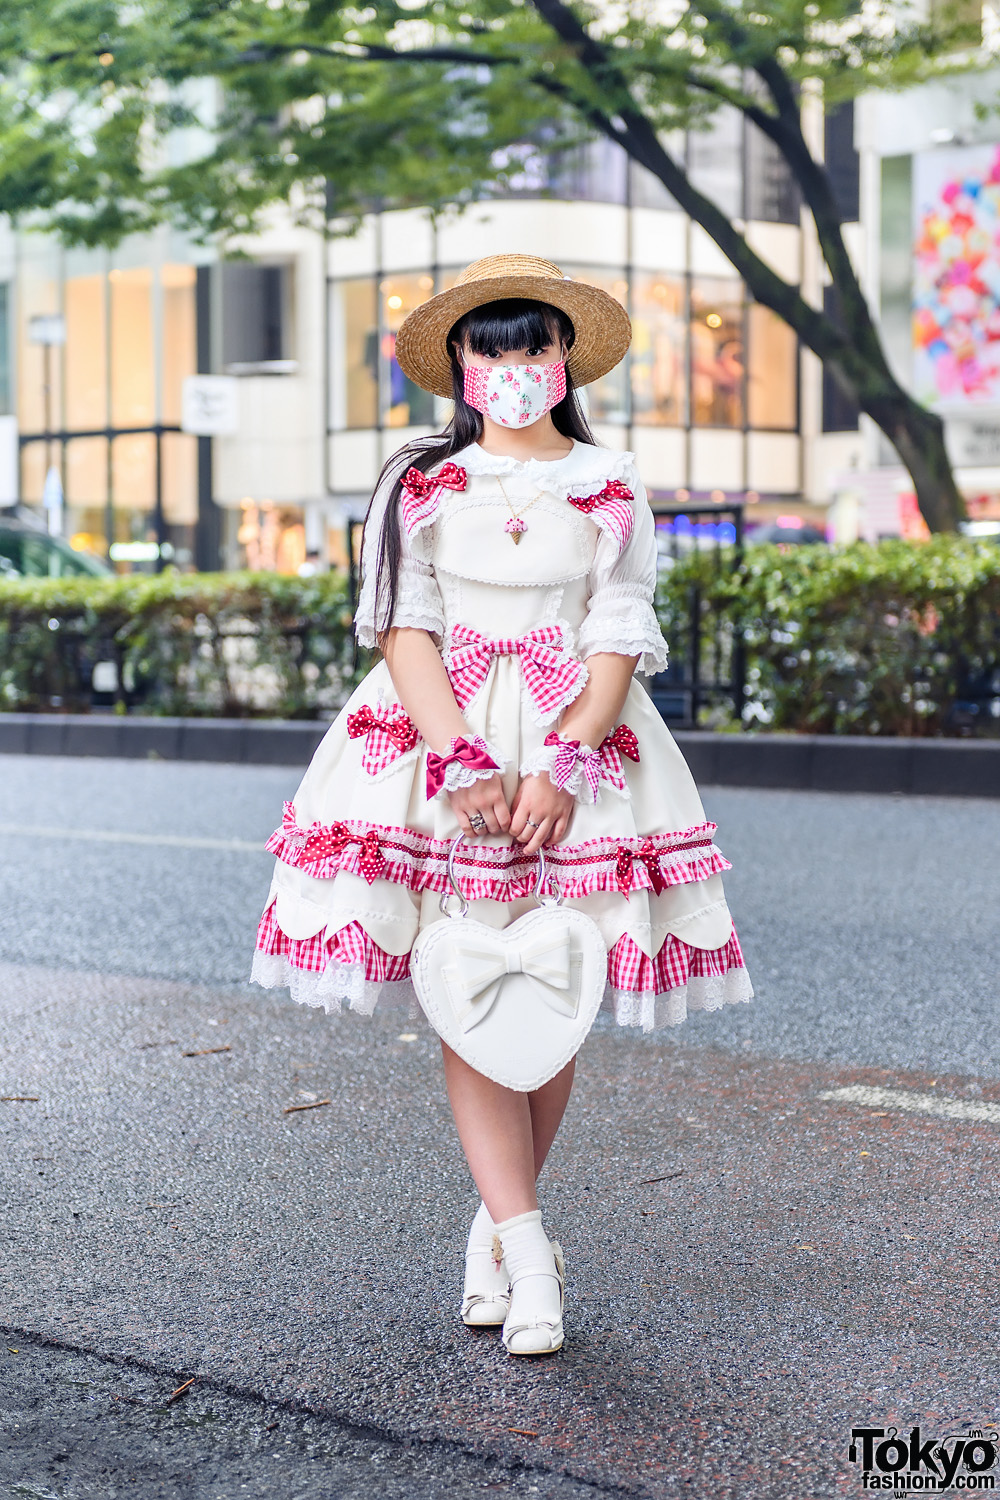 Baby The Stars Shine Bright Sweet Lolita Street Style W Straw Hat Floral Face Mask Ice Cream Necklace Bow Dress Heart Bag Bow Shoes Tokyo Fashion